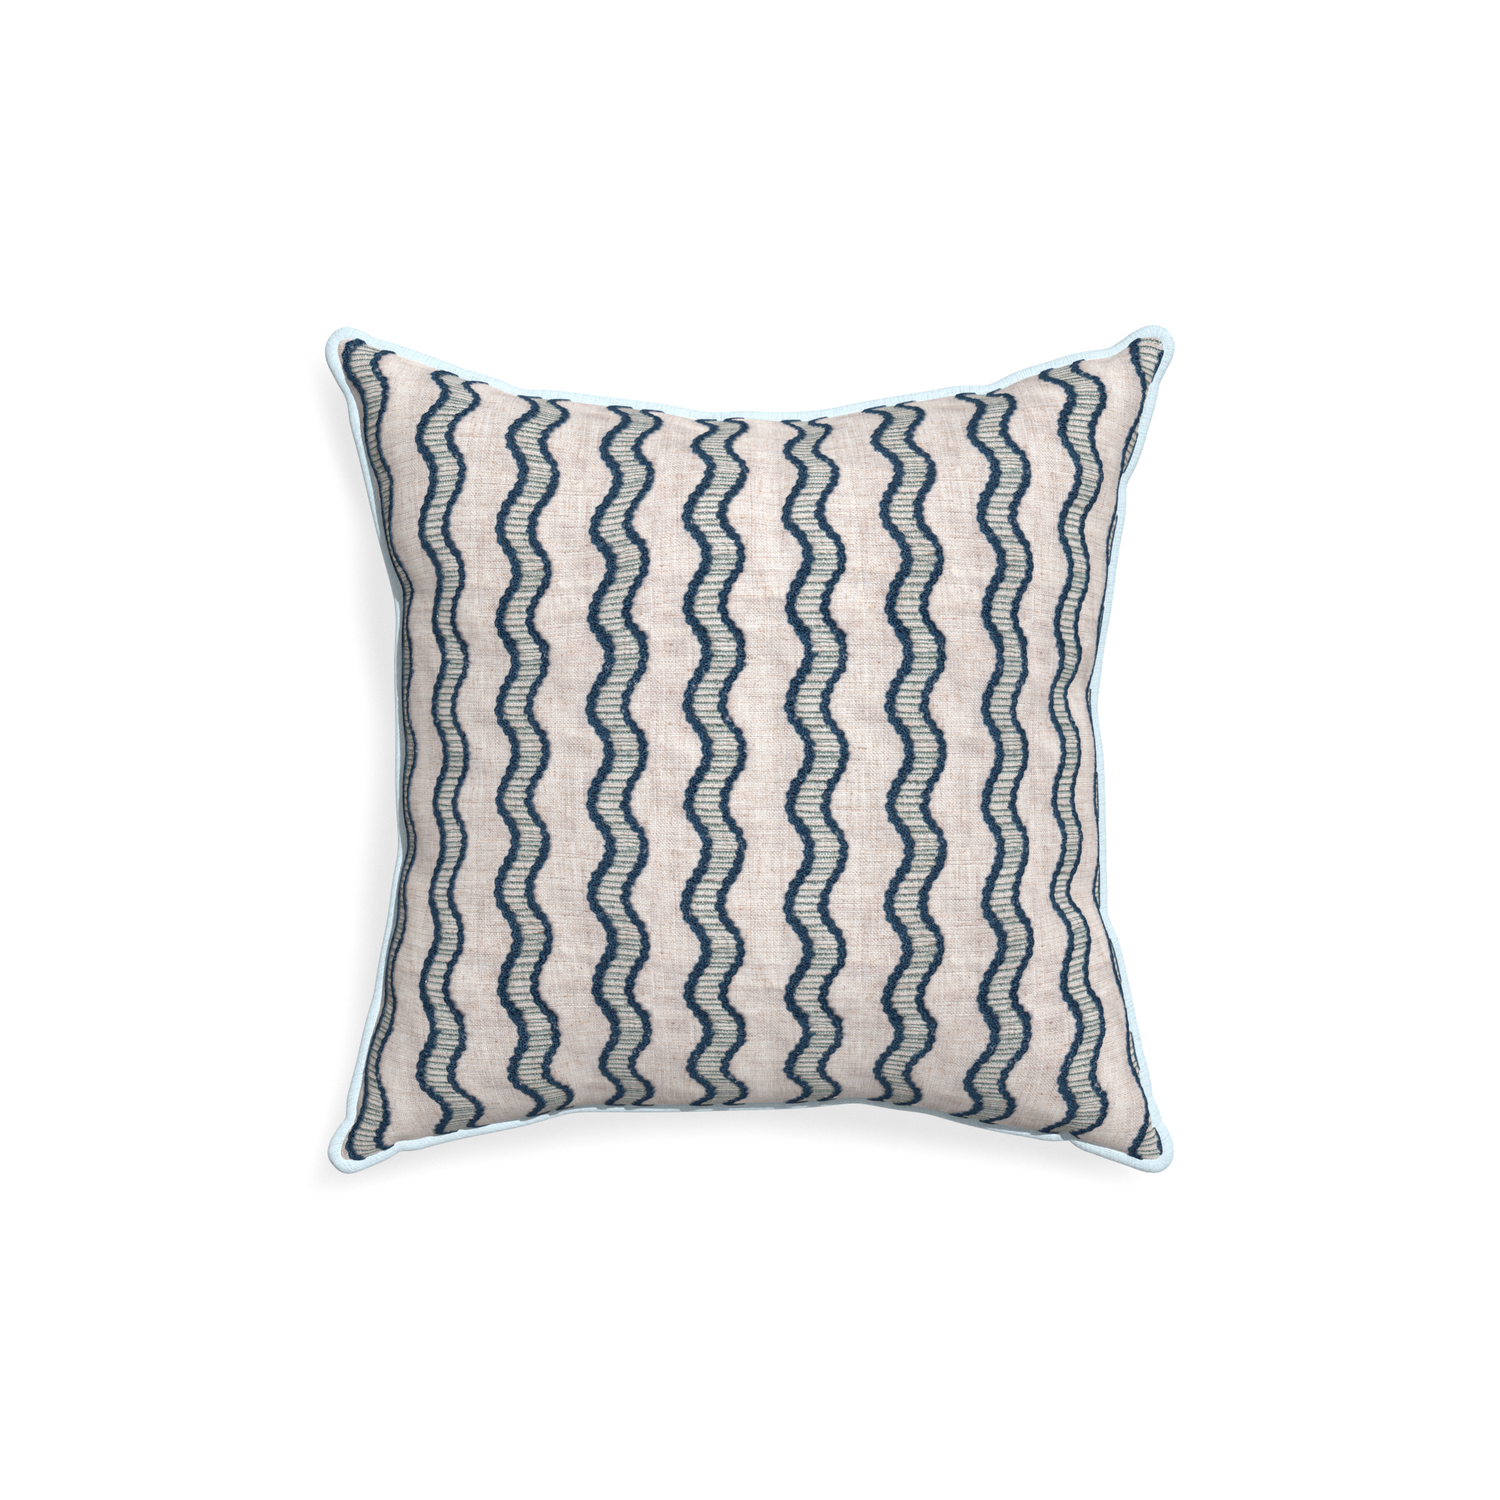 18-square beatrice custom embroidered wavepillow with powder piping on white background